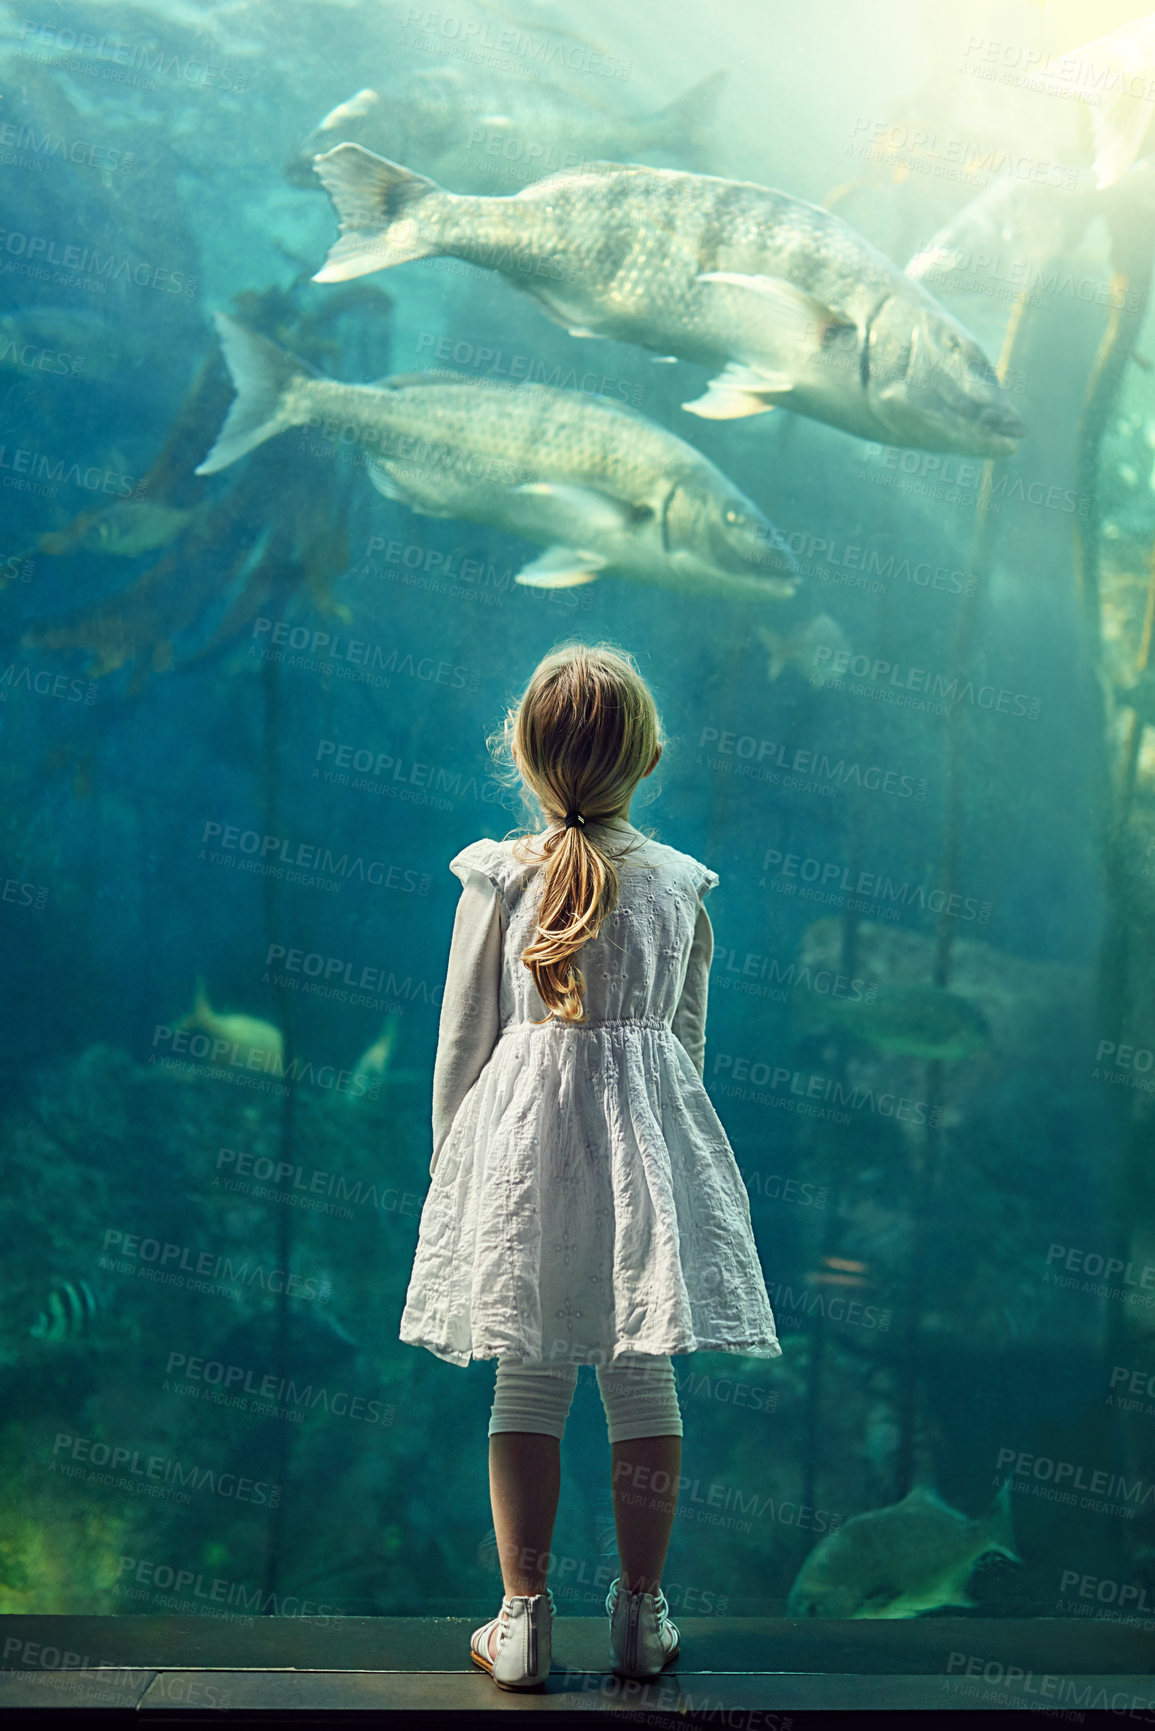 Buy stock photo Shot of a little girl looking at an exhibit in an aquarium